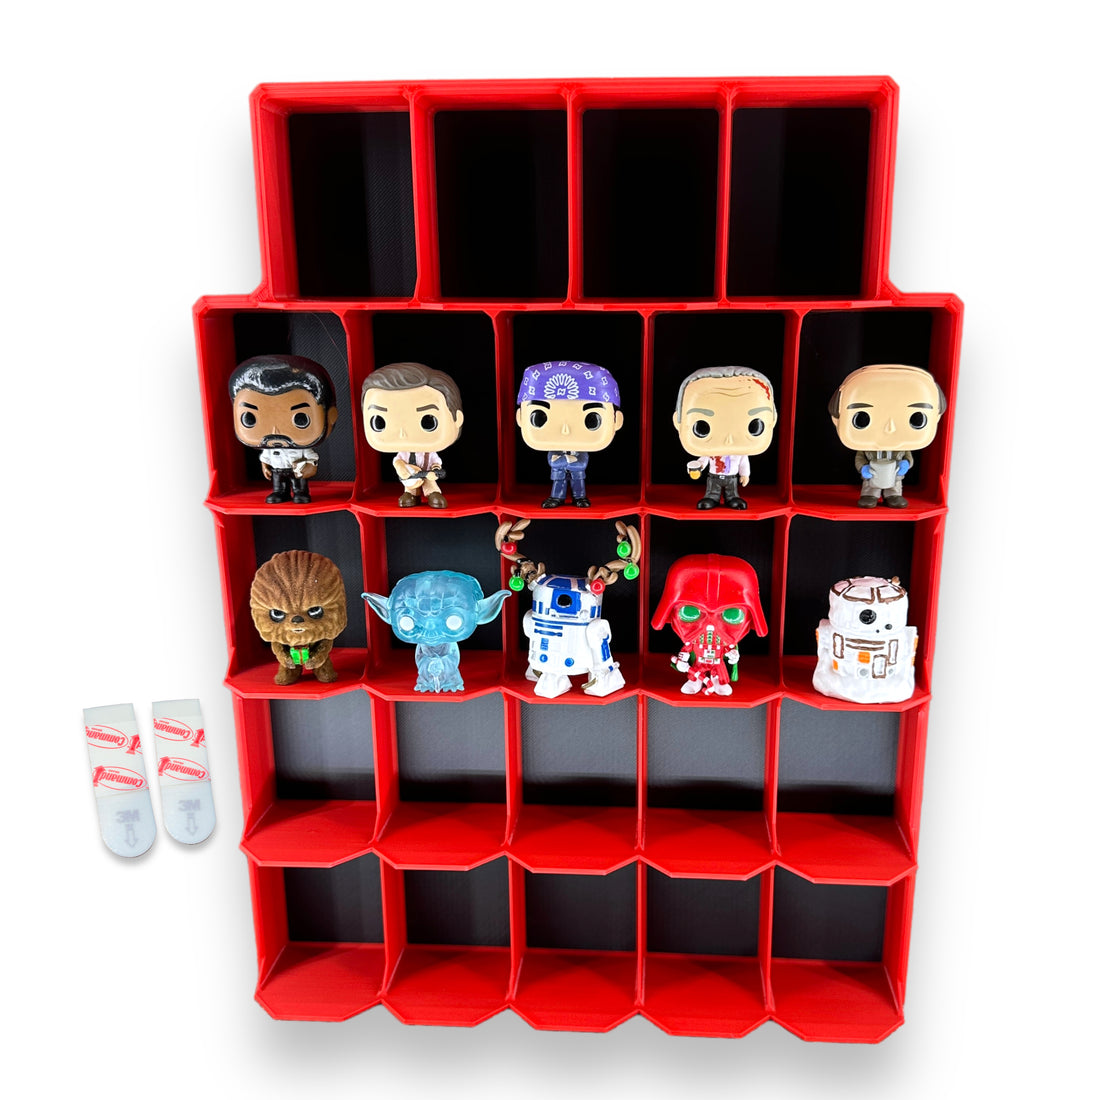 Spice Up Your Funko Pocket Pop Collection with Our New Wall Display!